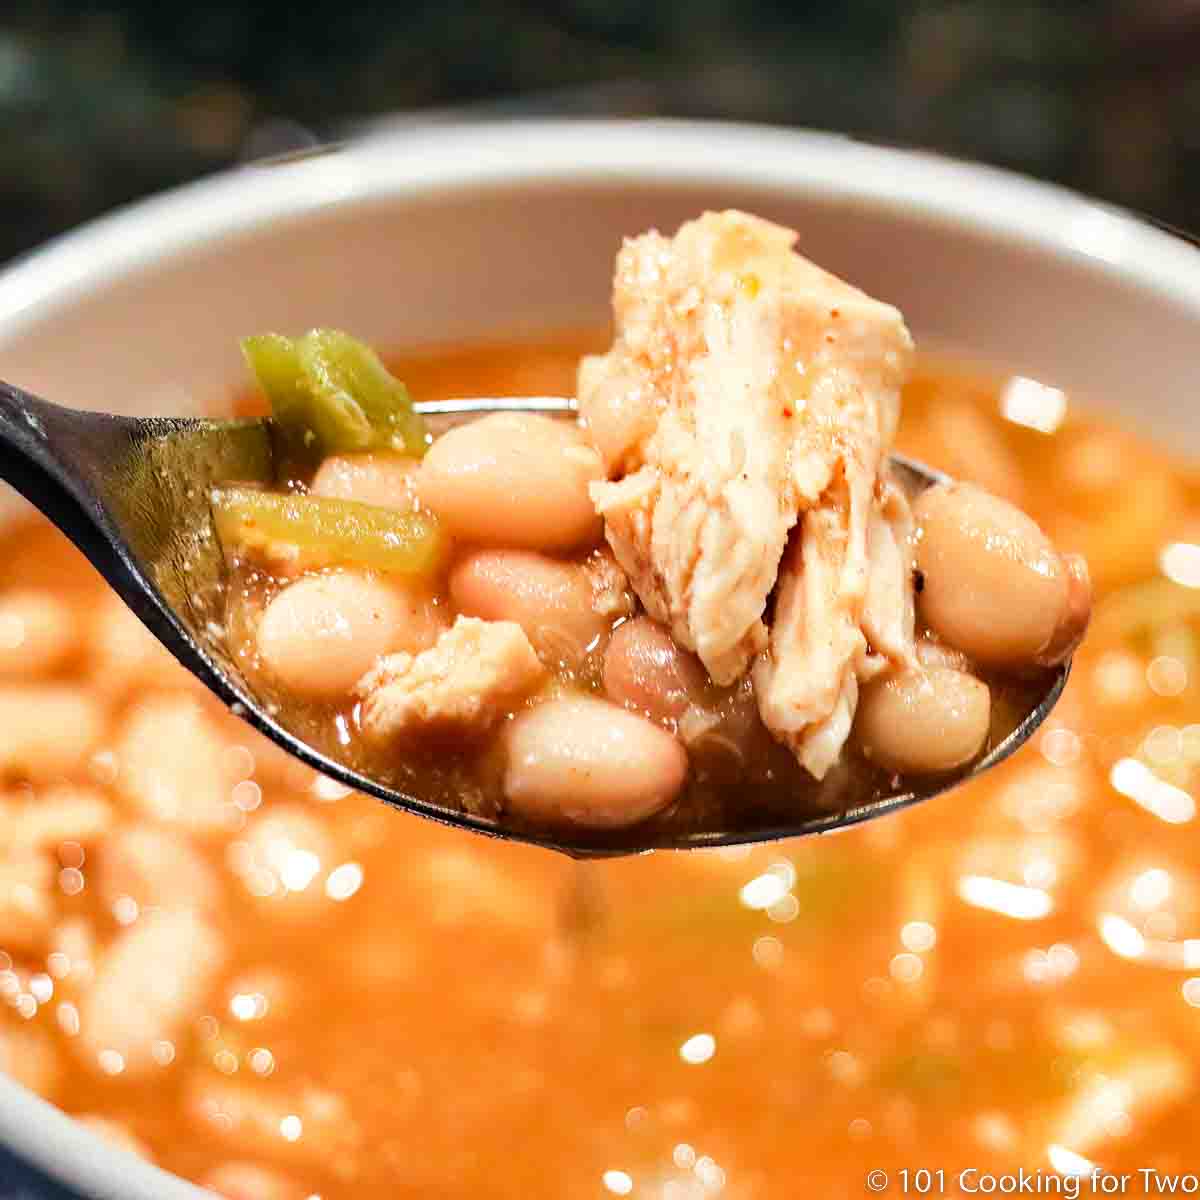 https://www.101cookingfortwo.com/wp-content/uploads/2017/09/Low-Fat-Crock-Pot-Chicken-Chili-on-a-spoon-C.jpg